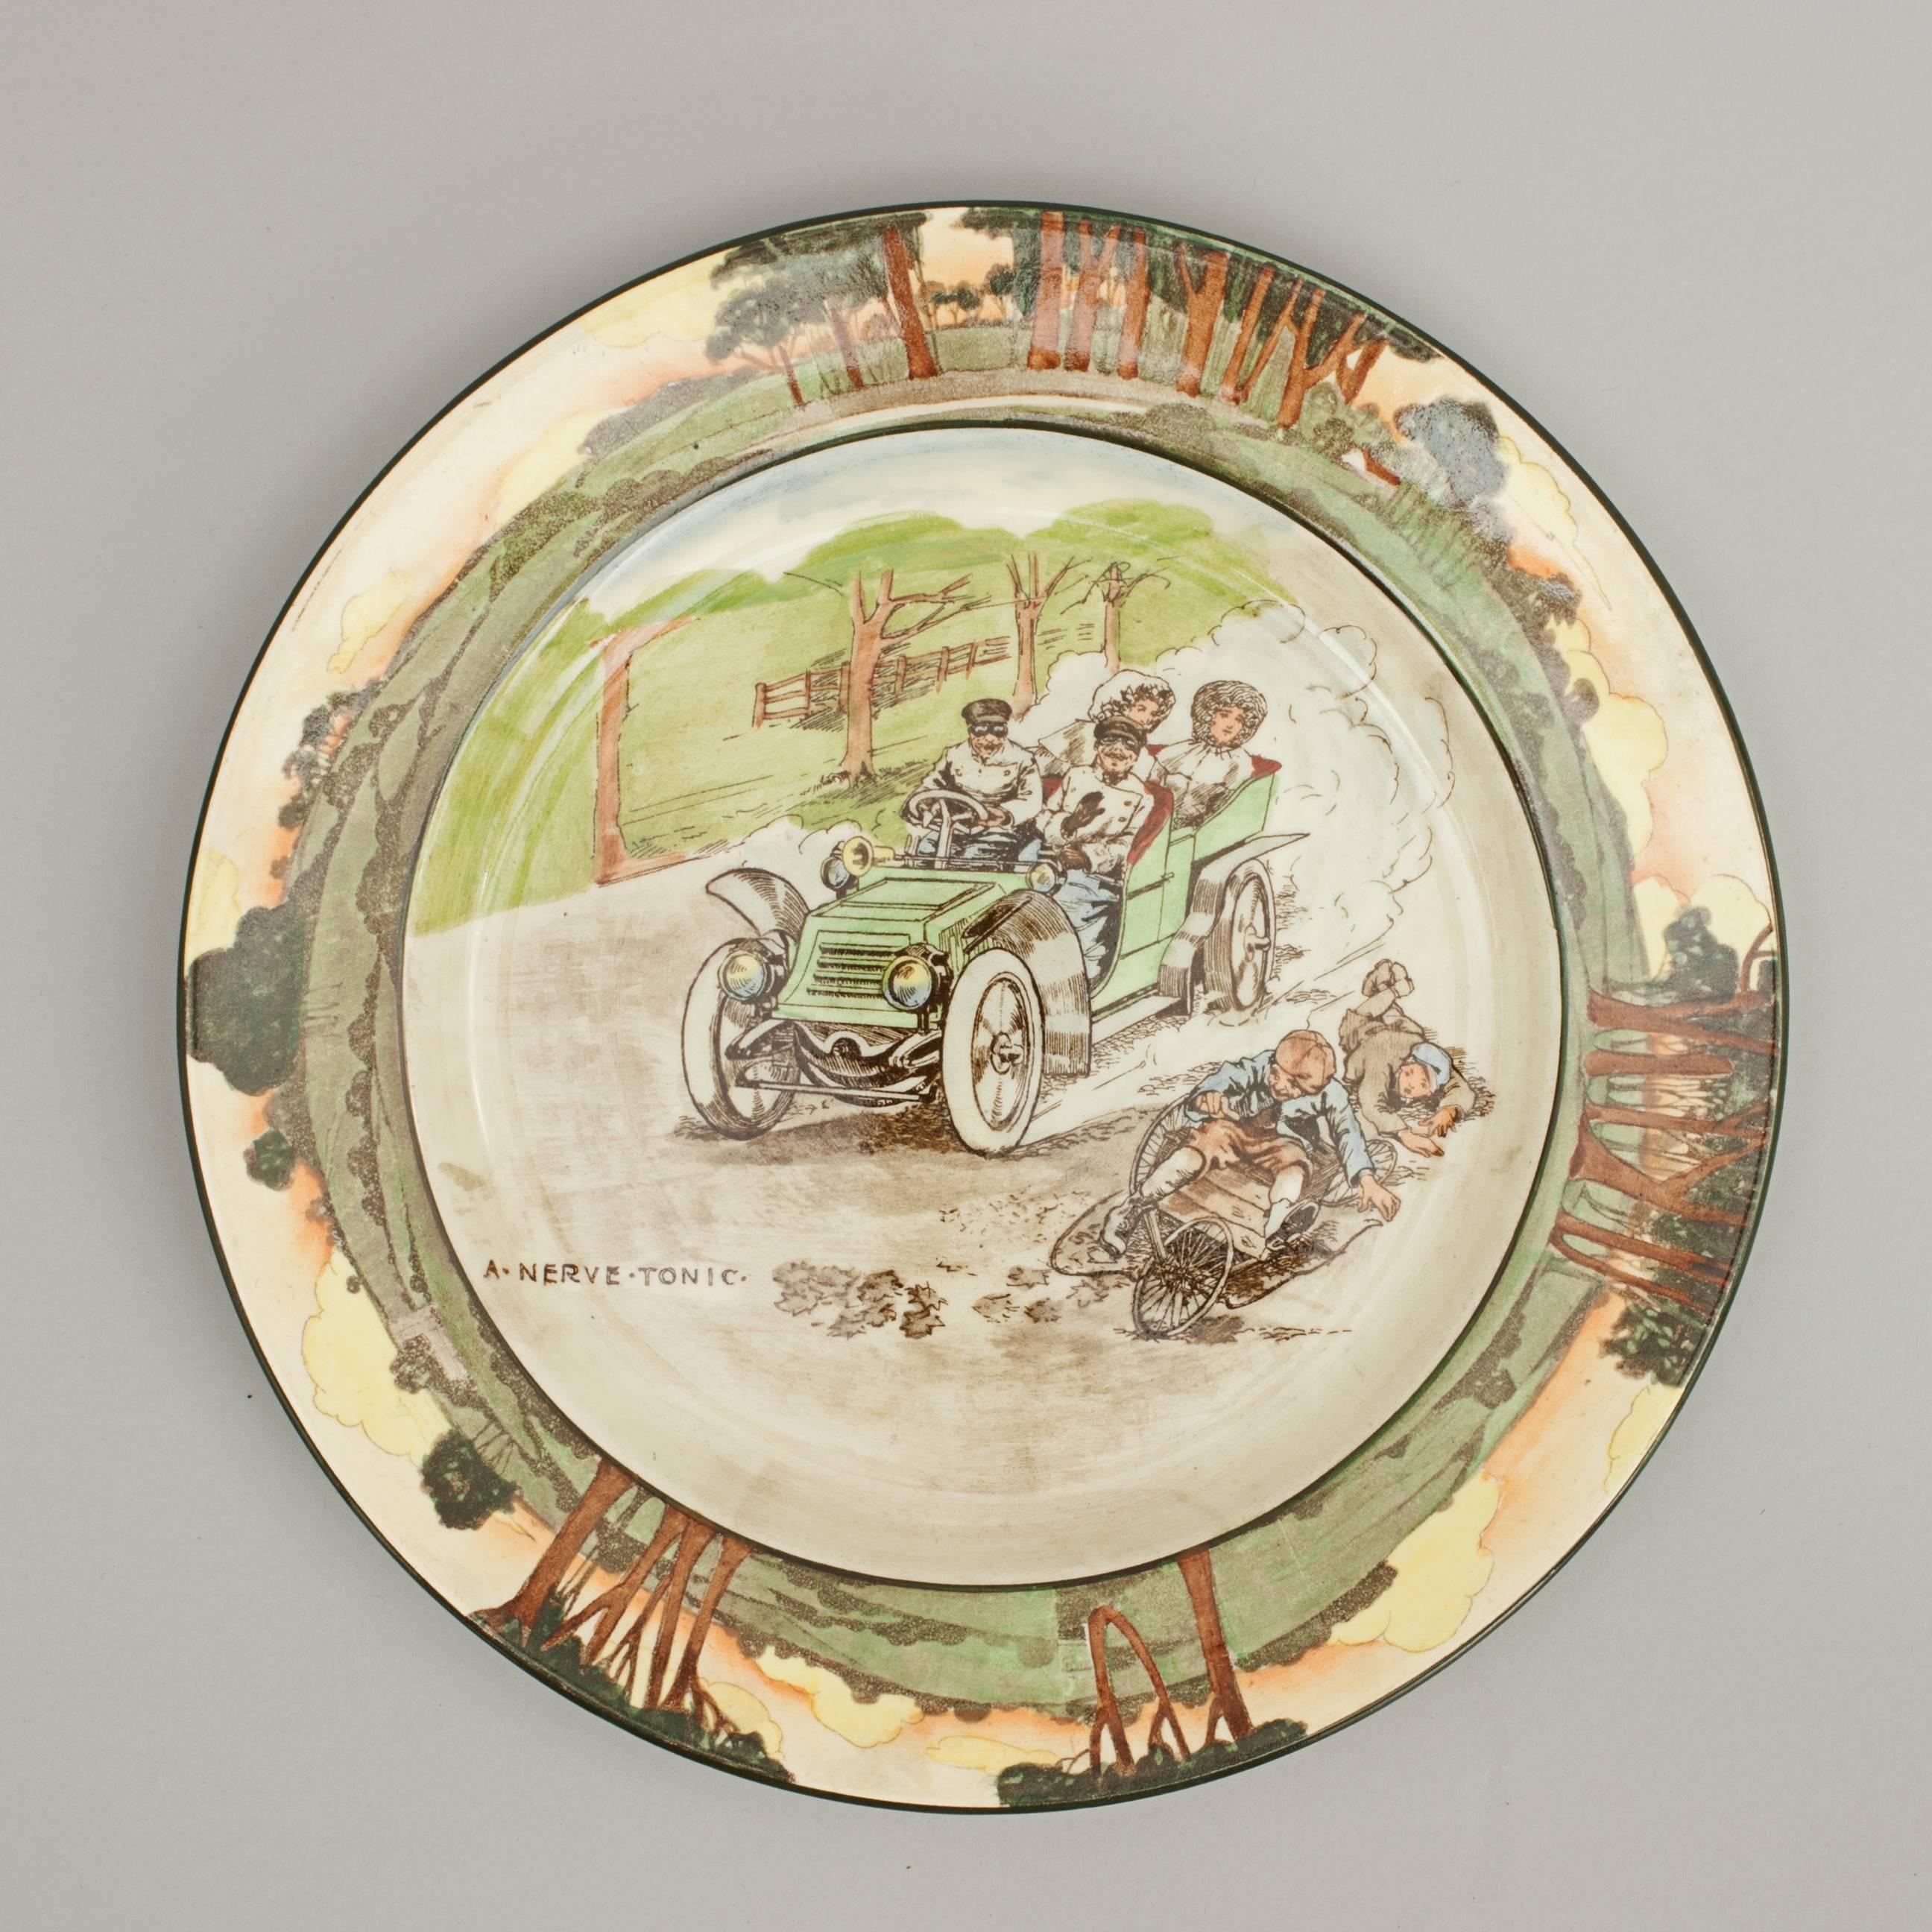 Rare royal Doulton motoring plate.
An early Royal Doulton automobile plate entitled 'A Nerve Tonic'. The plate is in excellent condition with no chips, cracks or repairs, there is the usual crazing to the glaze as would be expected. The plate